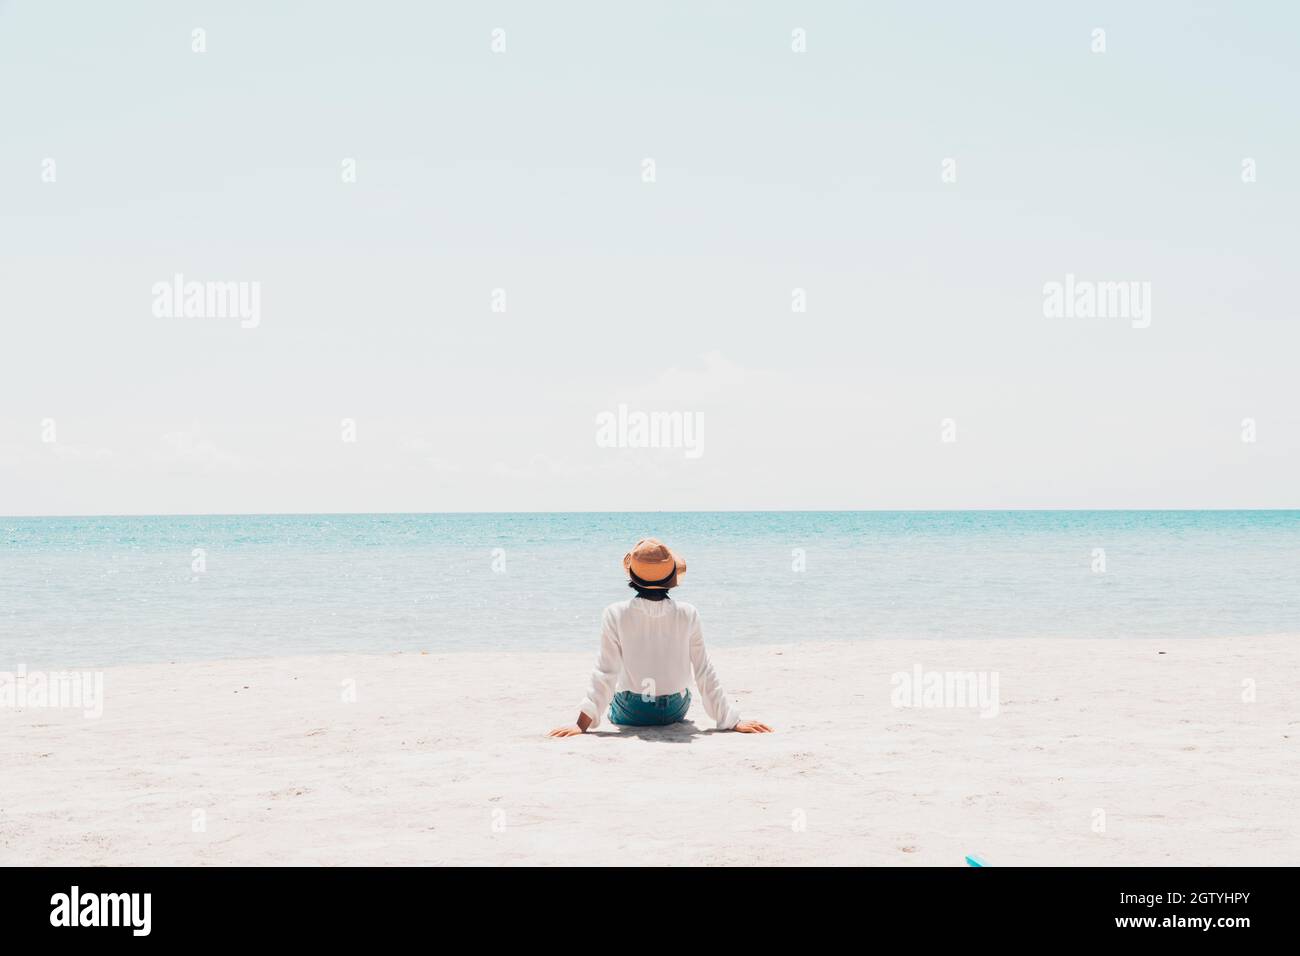 Rear View Of Girl Sitting At Beach Against Clear Sky During Sunny Day Stock Photo